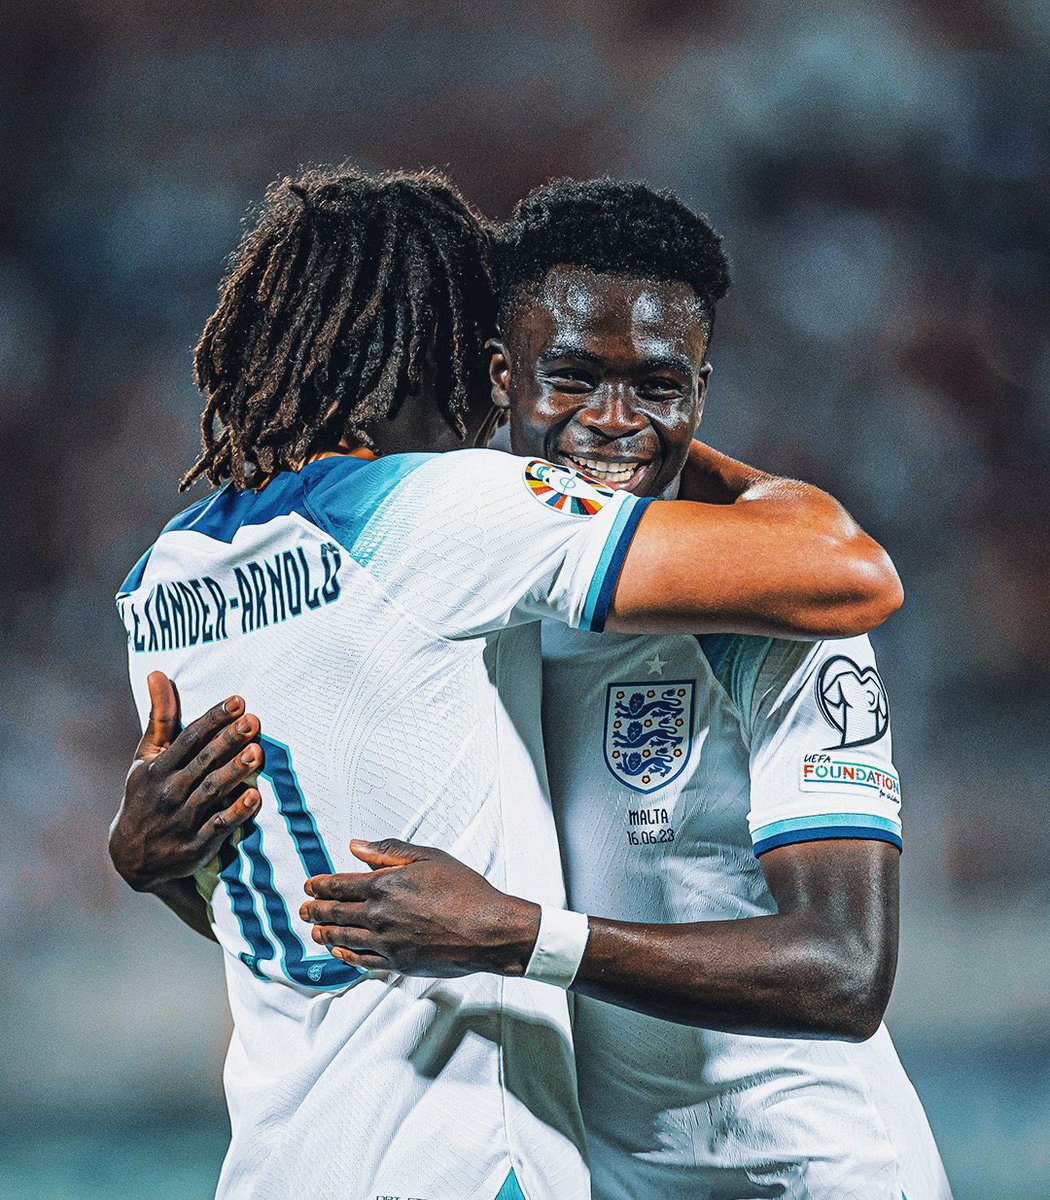 #LFC #ENG THIS COMBO IS CURRENTLY THE BEST COMBO IN WORLD FOOTBALL. MAYBE WE SEE THEM AT ANFIELD. @TrentAA @BukayoSaka87